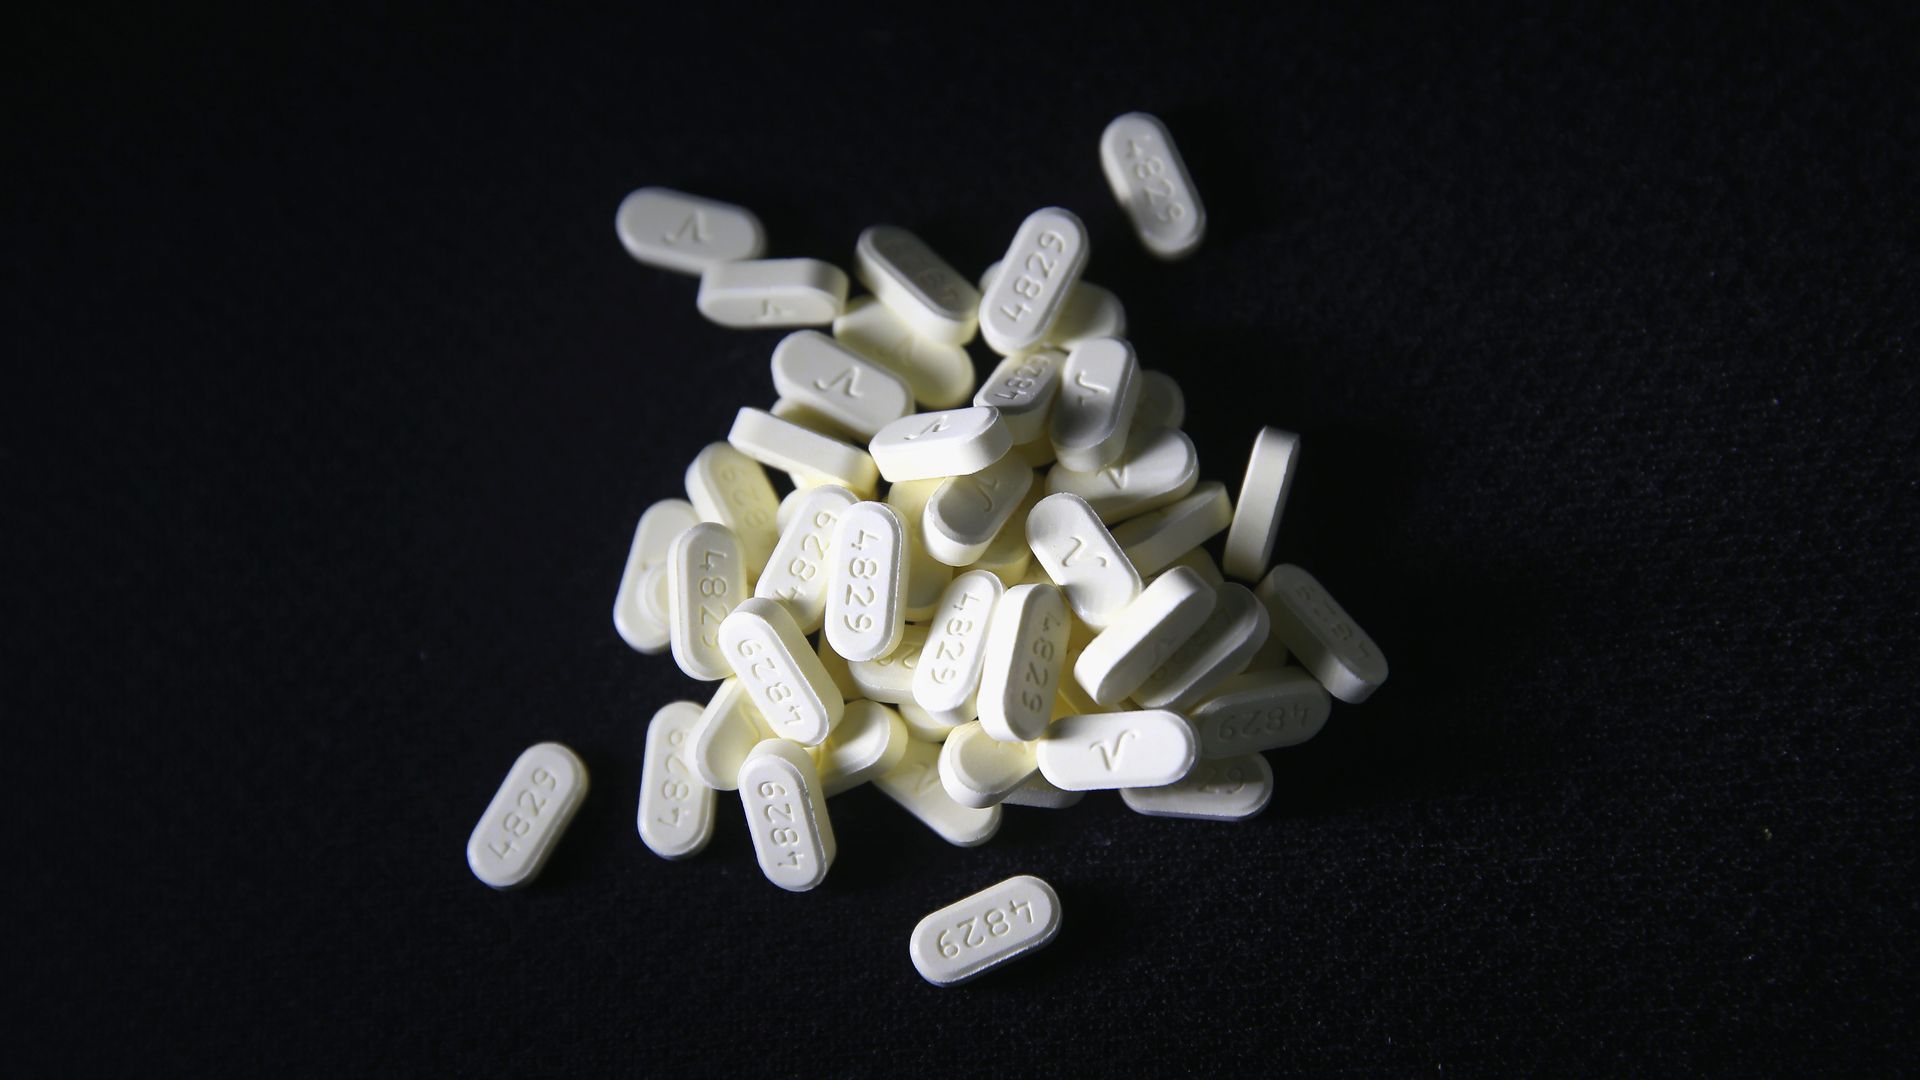 A pile of oxycodone pills.